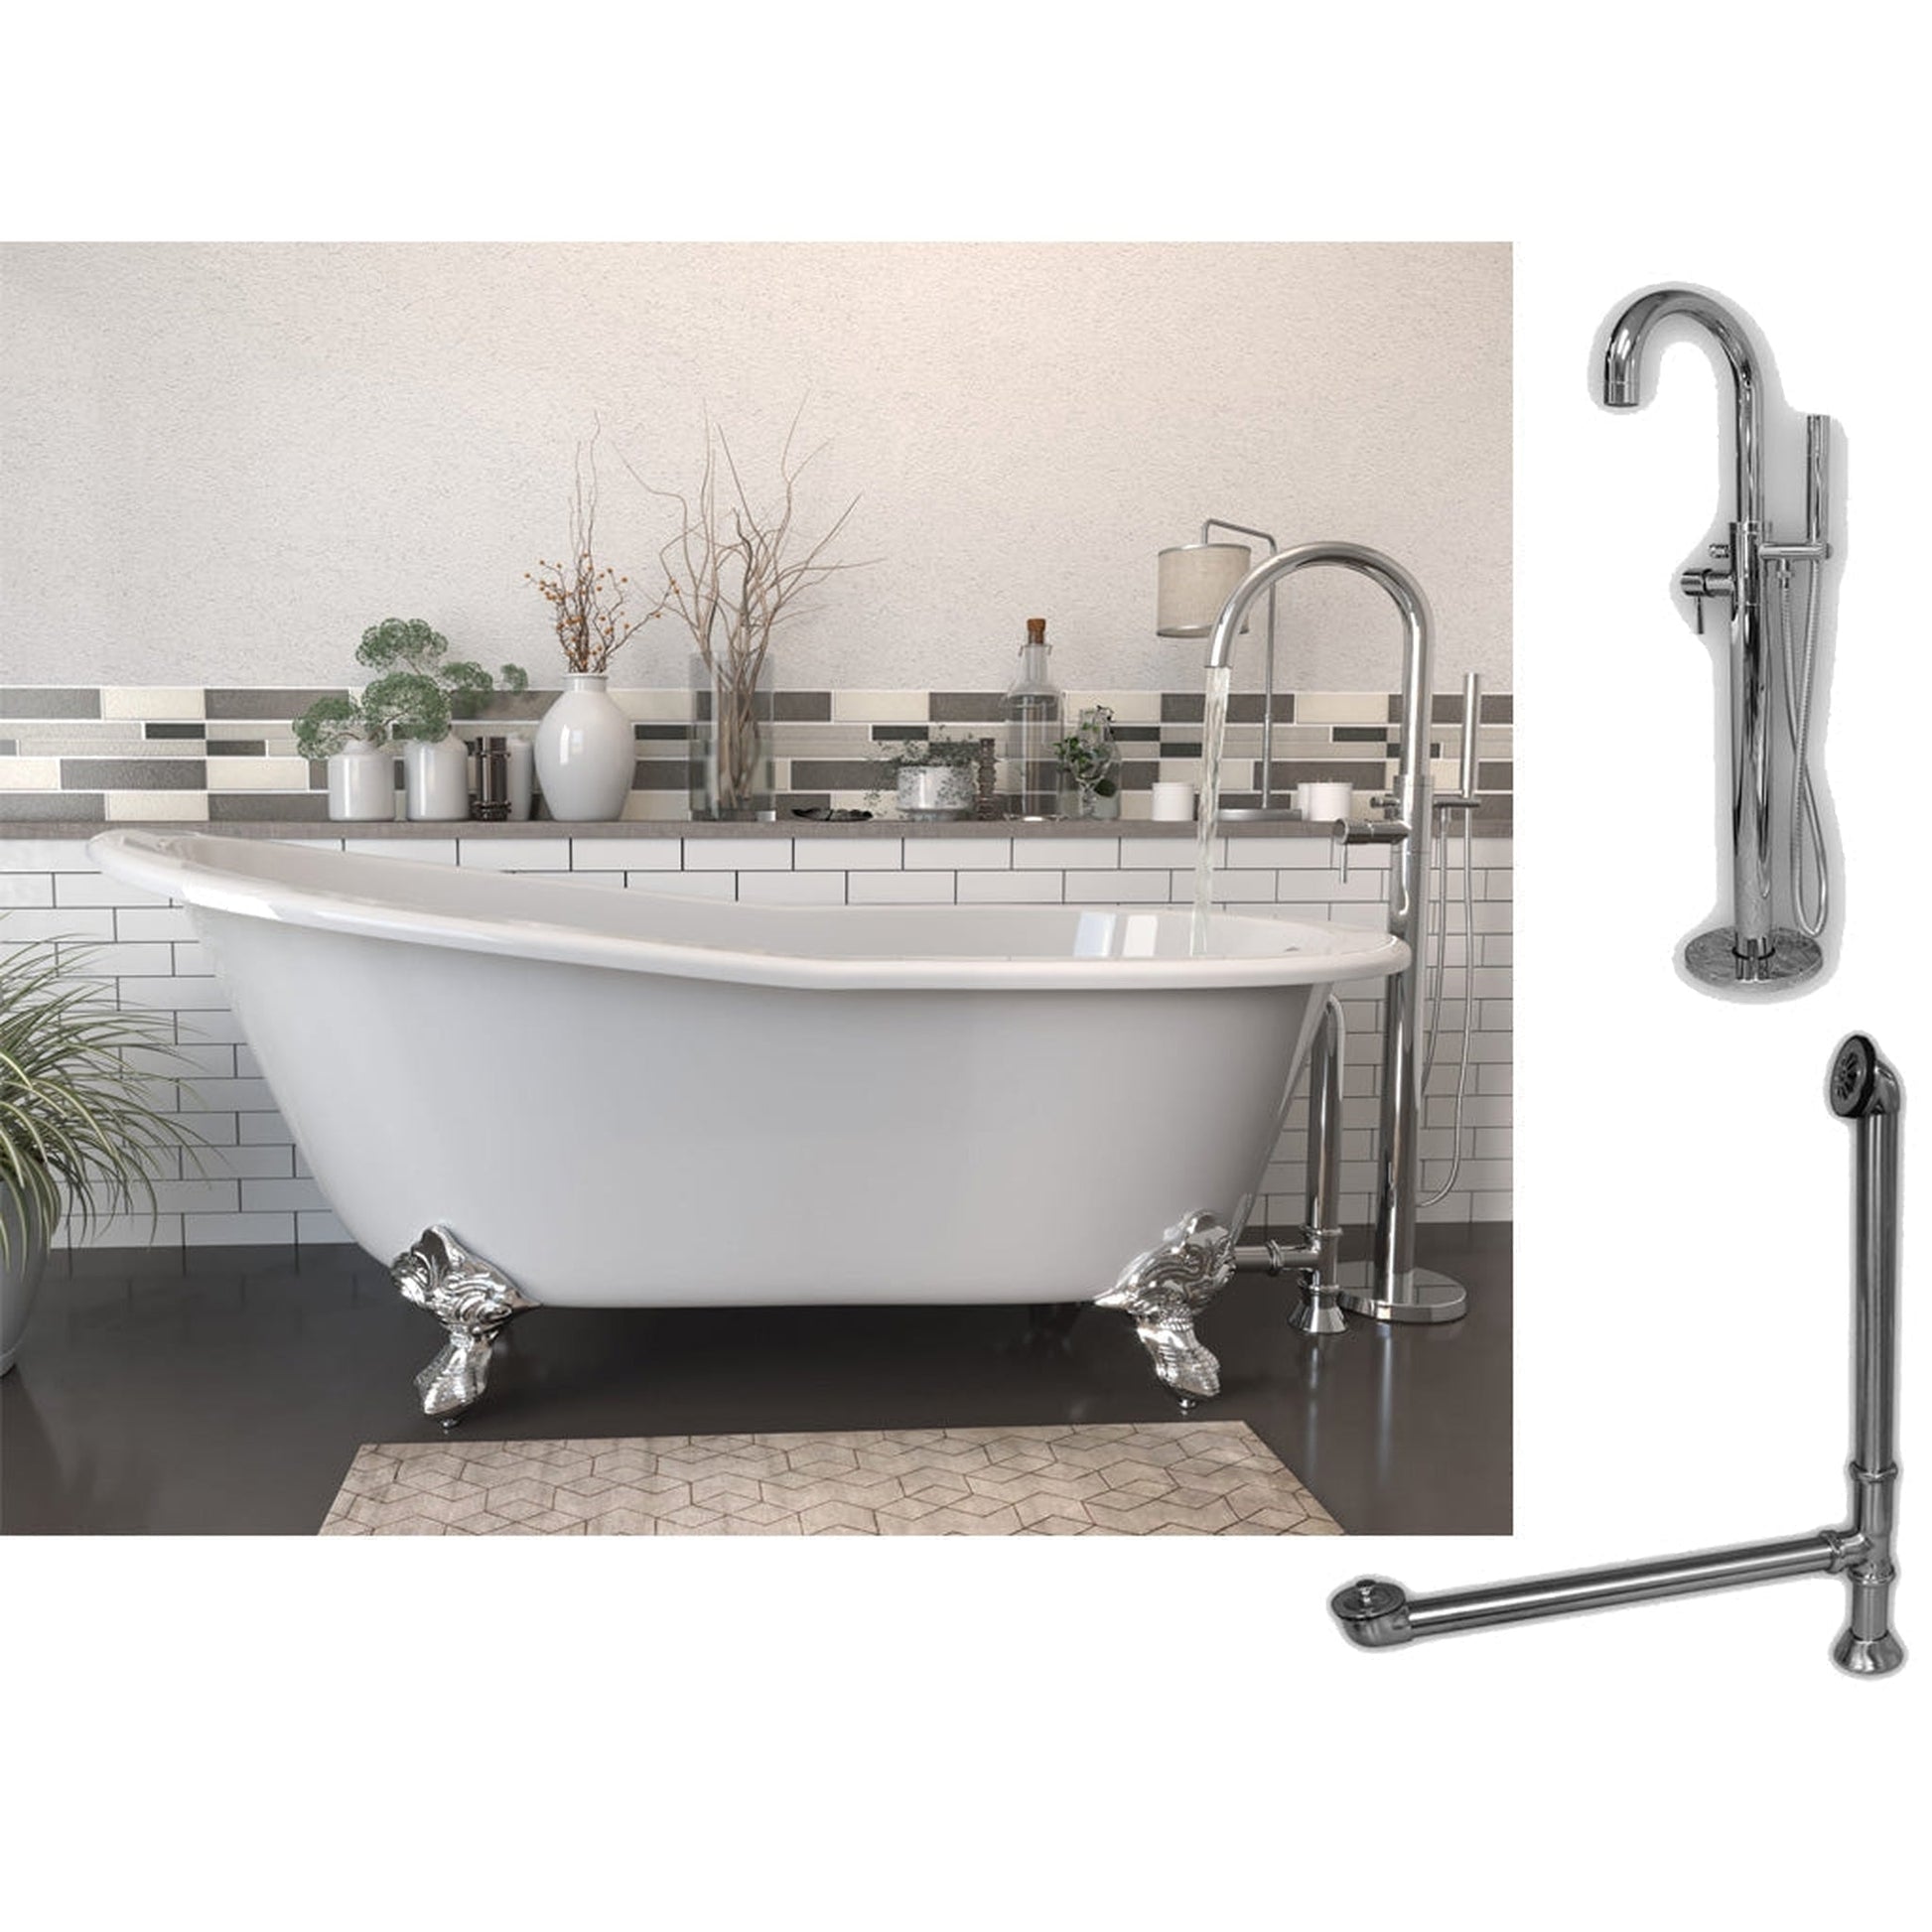 Cambridge Plumbing 67" White Cast Iron Clawfoot Bathtub With No Deck Holes And Complete Plumbing Package Including Modern Floor Mounted Faucet, Drain And Overflow Assembly In Polished Chrome